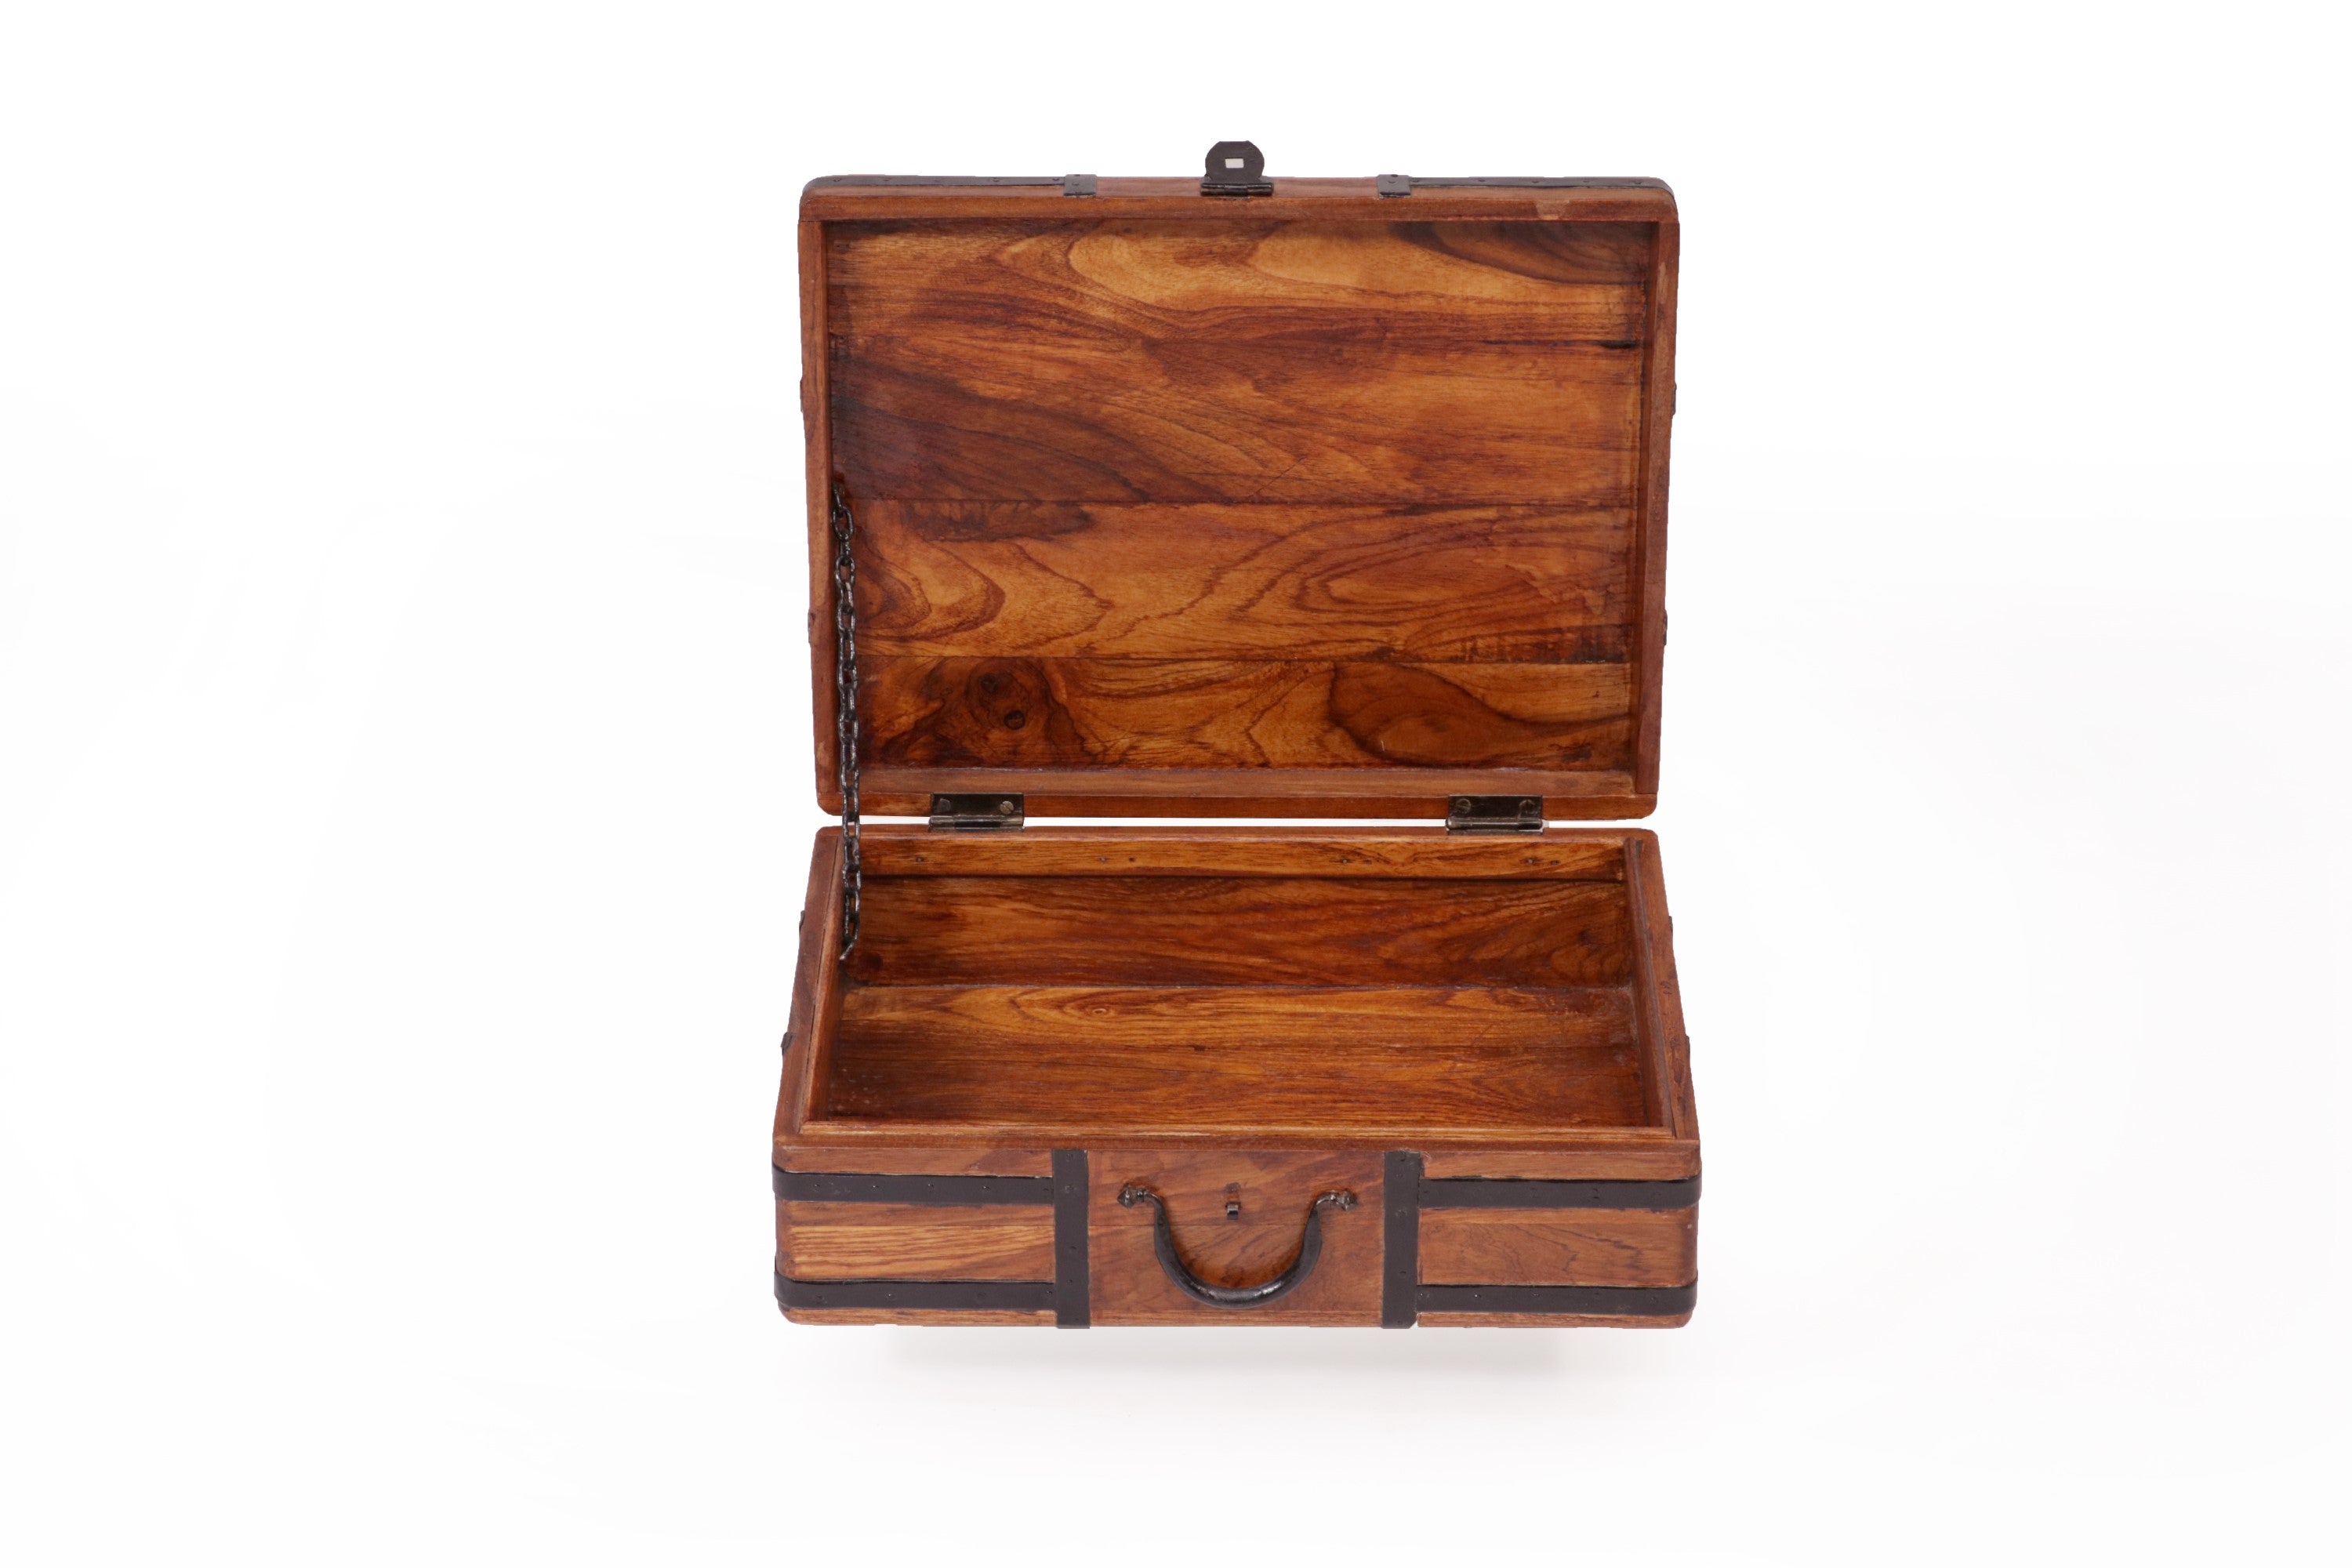 Metal Fitted Wooden Suitcase Wooden Box